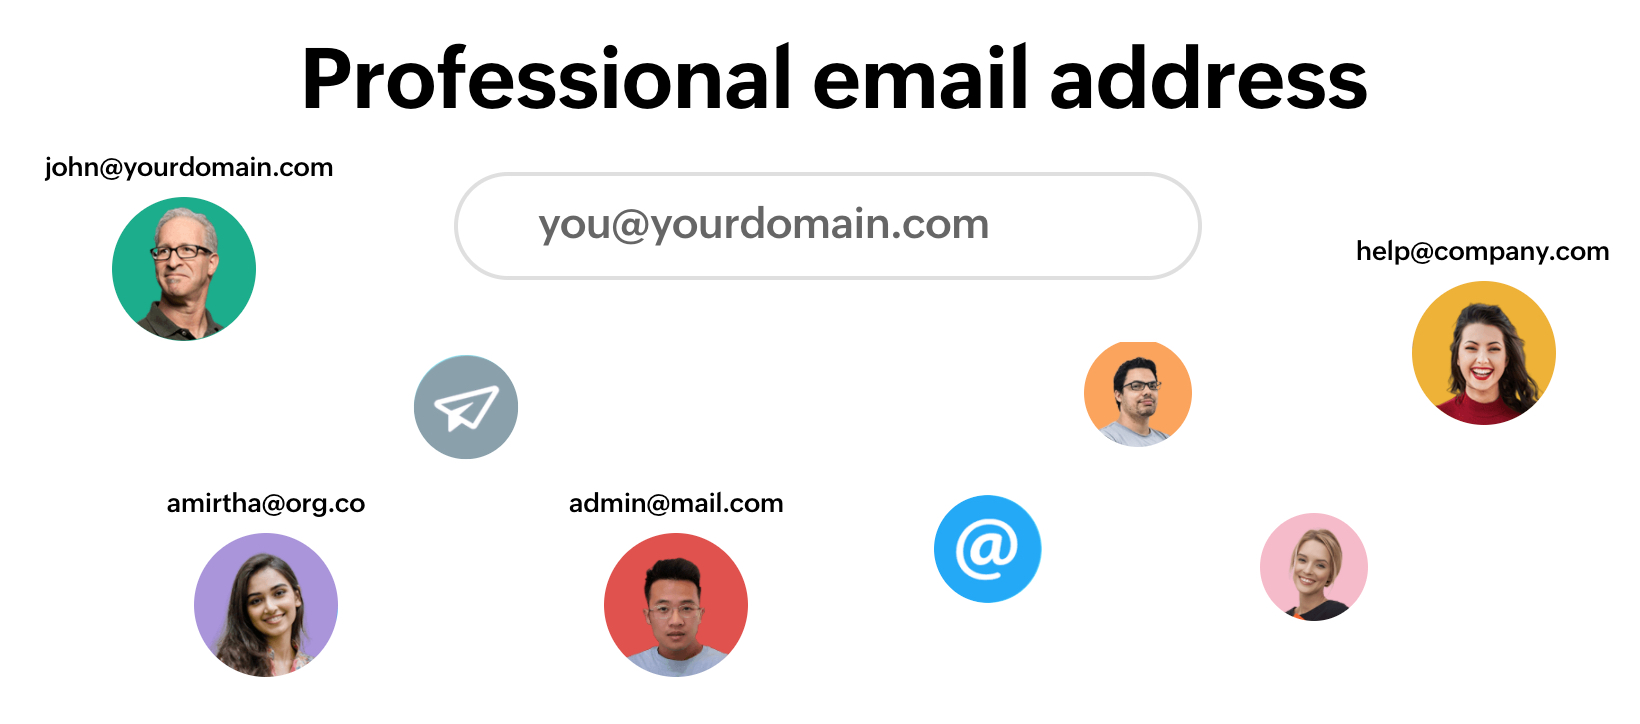 How to set up a professional email address (+examples) - Zoho Mail